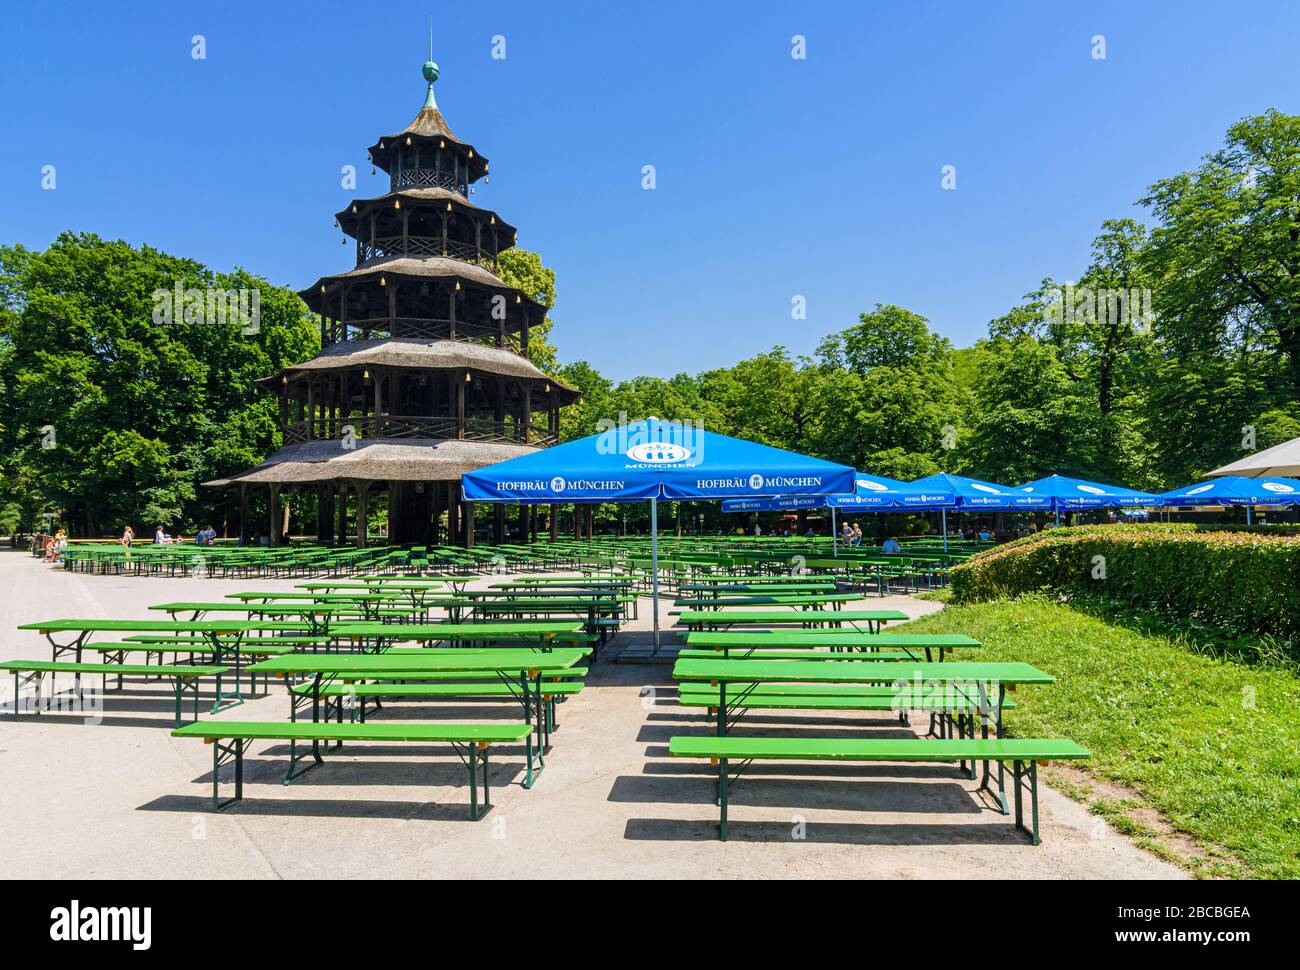 Restaurant and Beer Garden at the Chinese Tower, English Garden, Munich, Bavaria, Germany Stock Photo